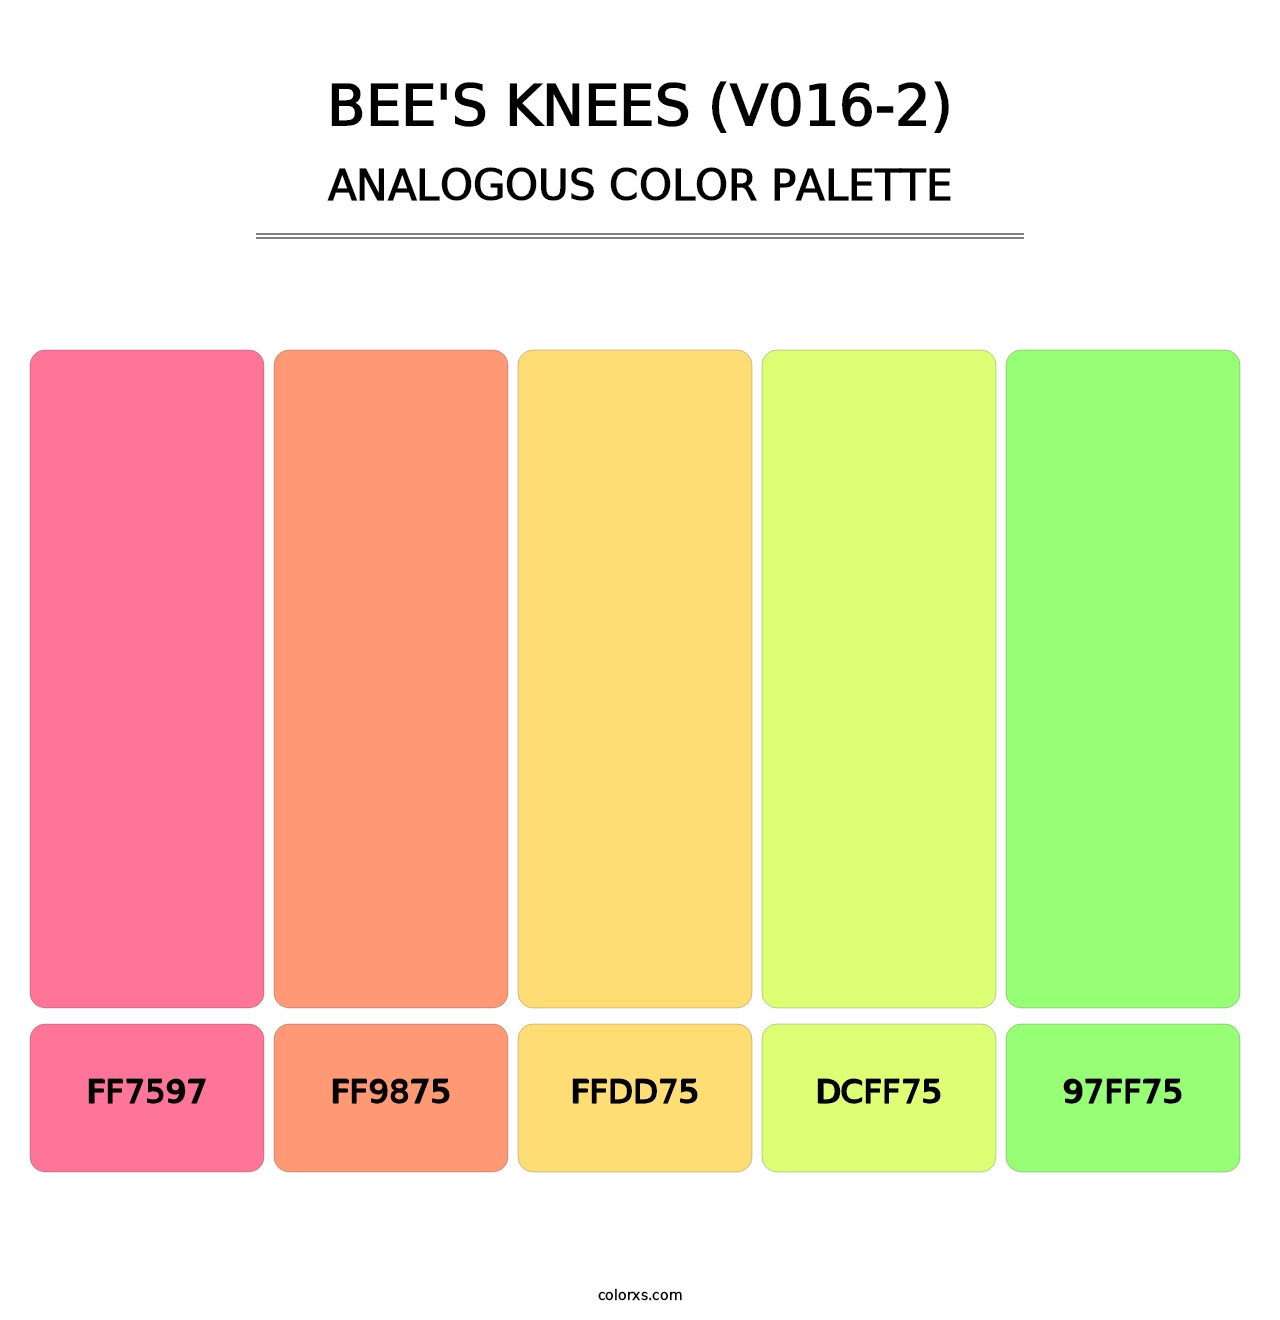 Bee's Knees (V016-2) - Analogous Color Palette